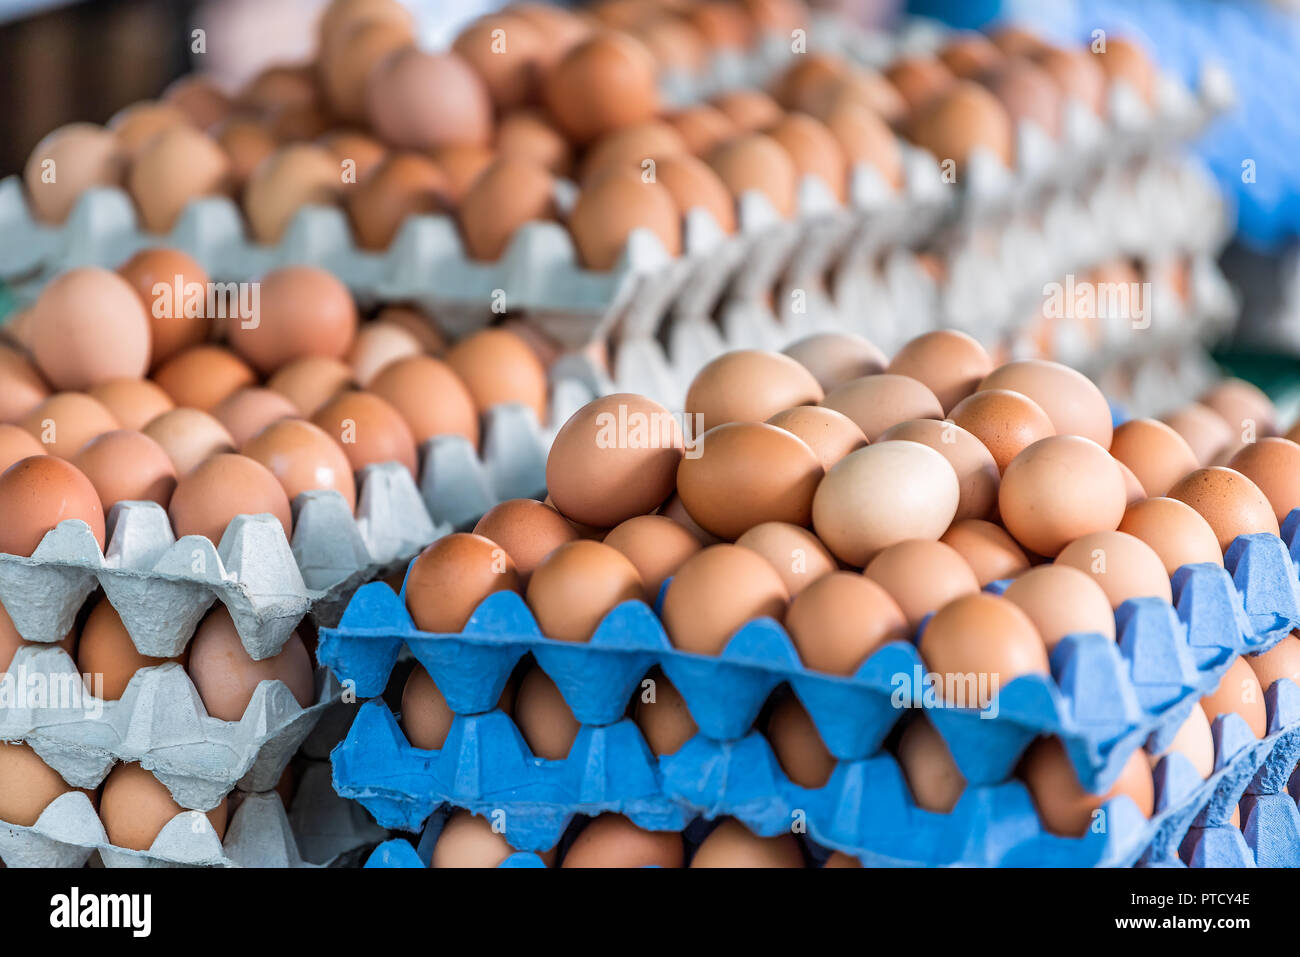 Closeup of many trays of farm fresh brown and white multicolored eggs on display in farmer's market in London, UK Stock Photo